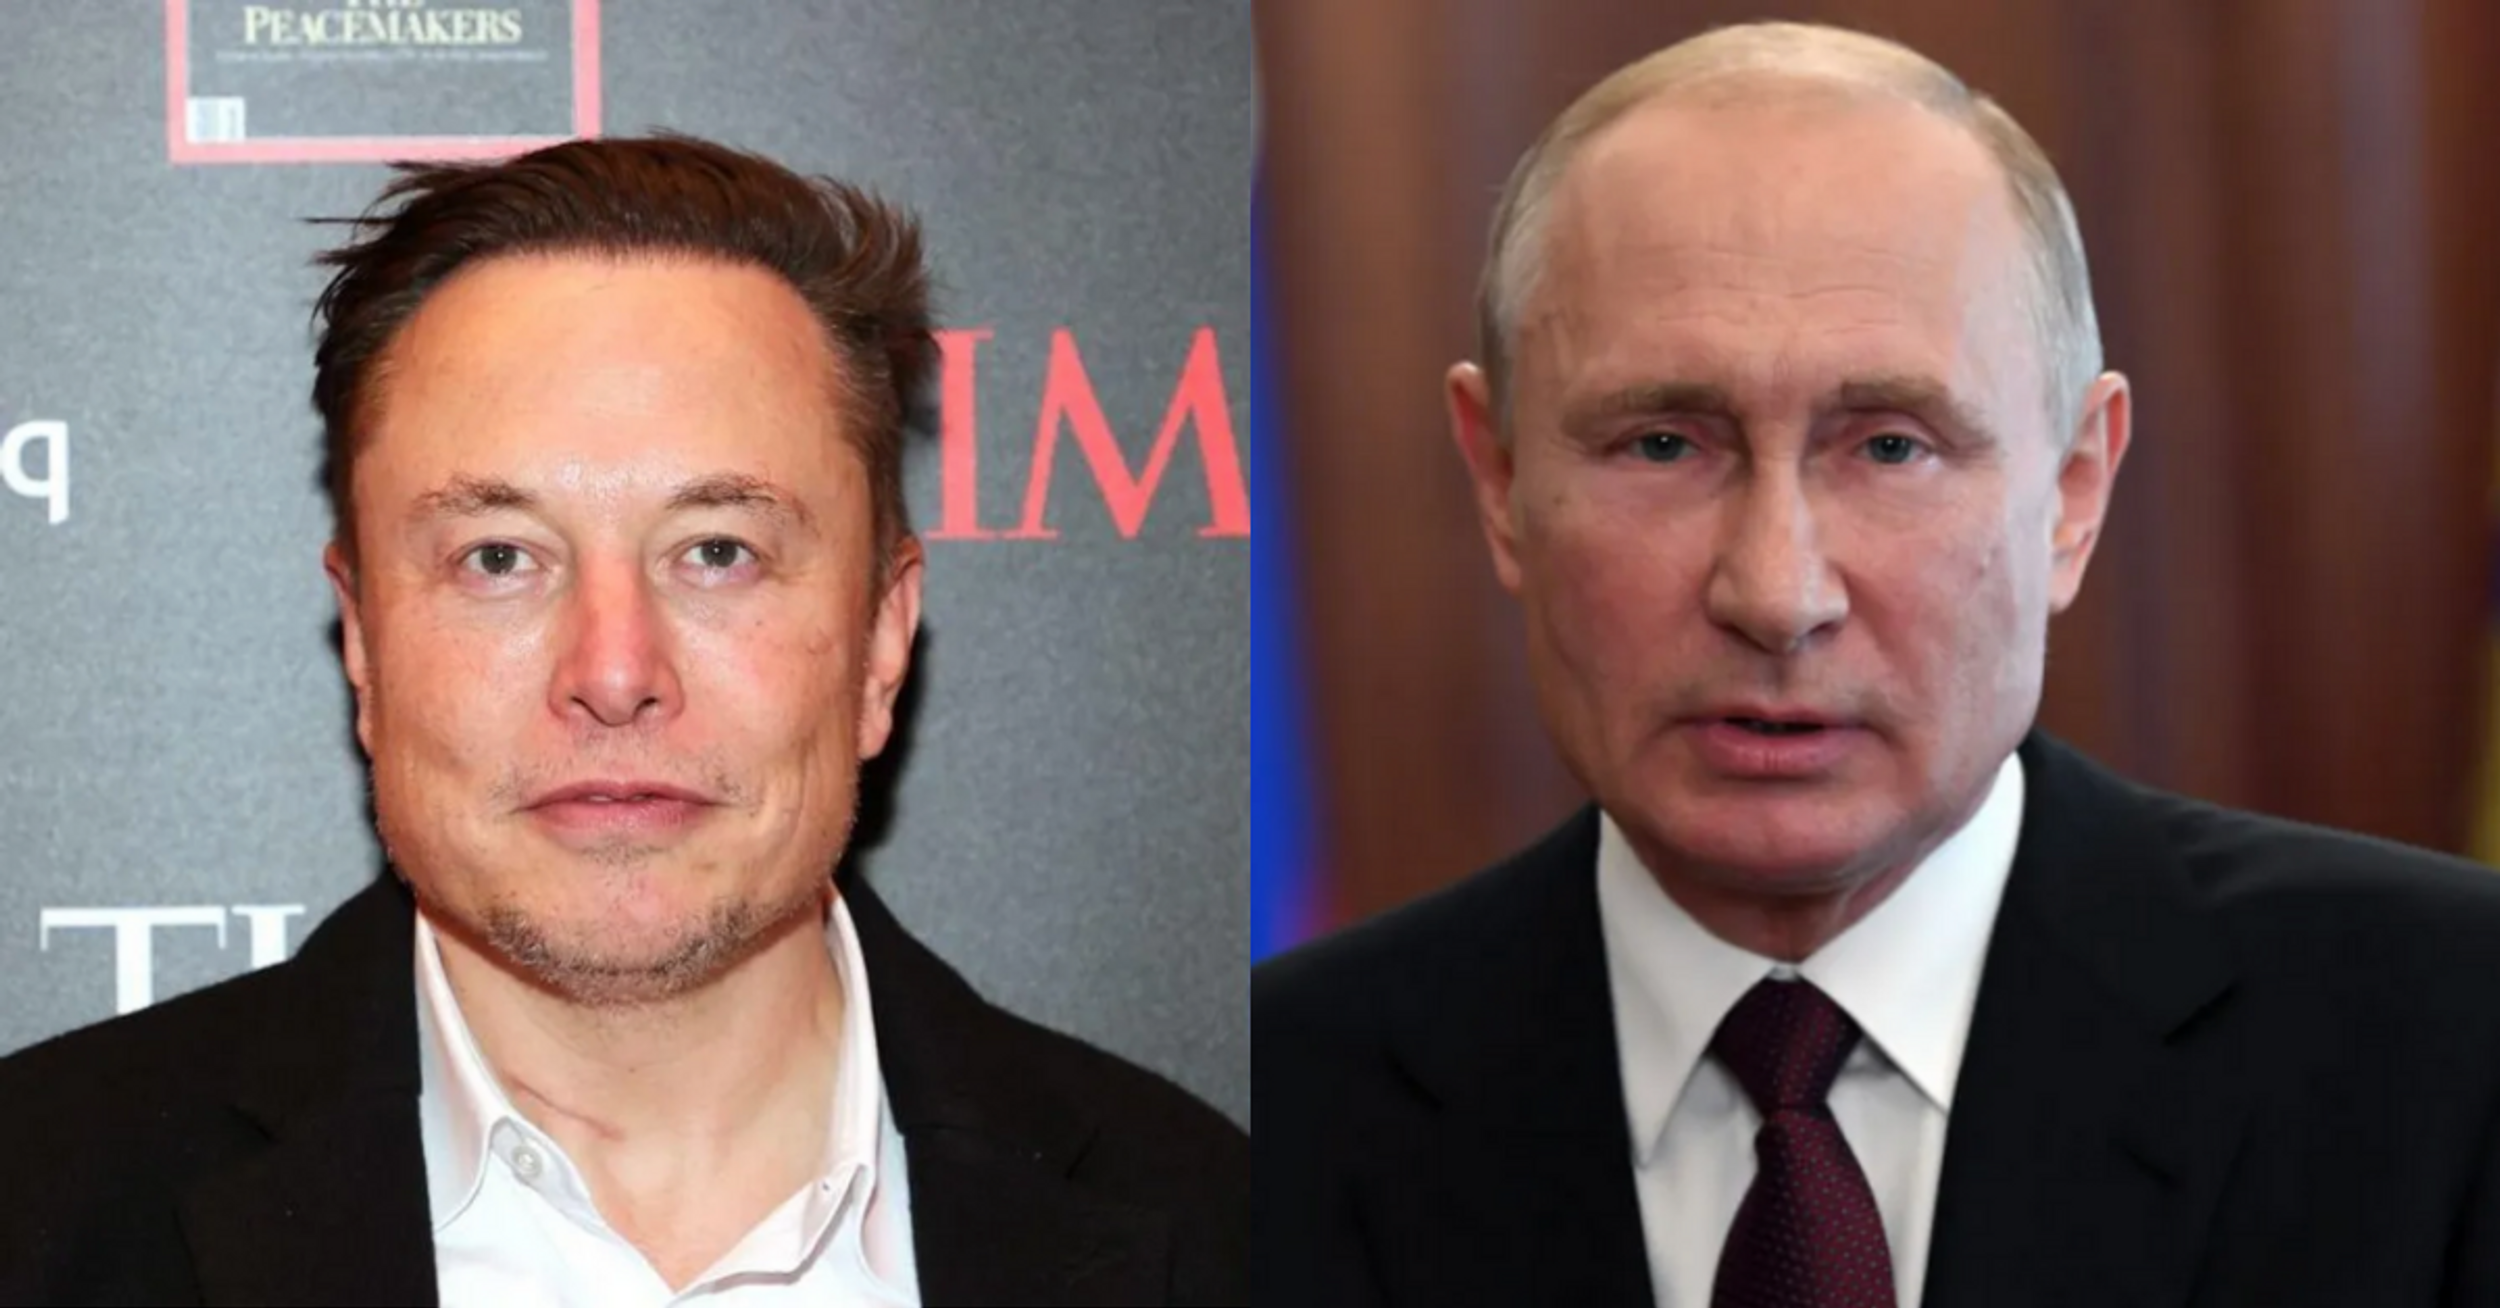 Elon Musk Just Challenged Putin To 'Single Combat' To Settle Ukraine War—And Twitter Is Cringing